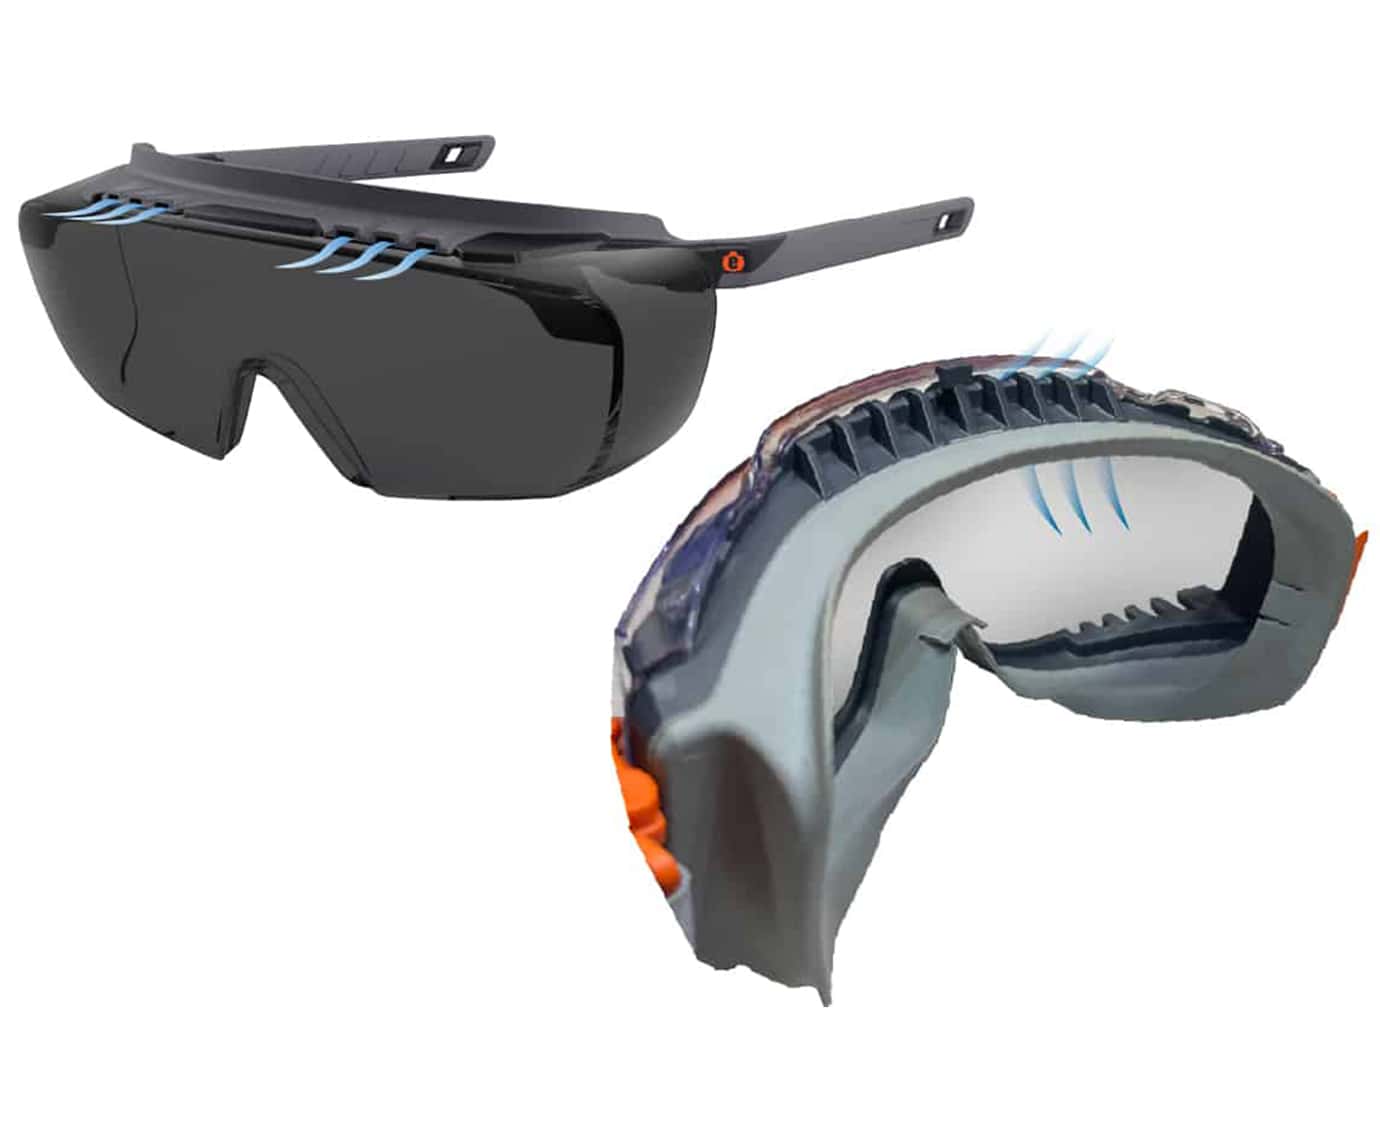 Skullerz Osmin Safety Glasses and Skullerz MODI Safety Goggles with venting allow airflow